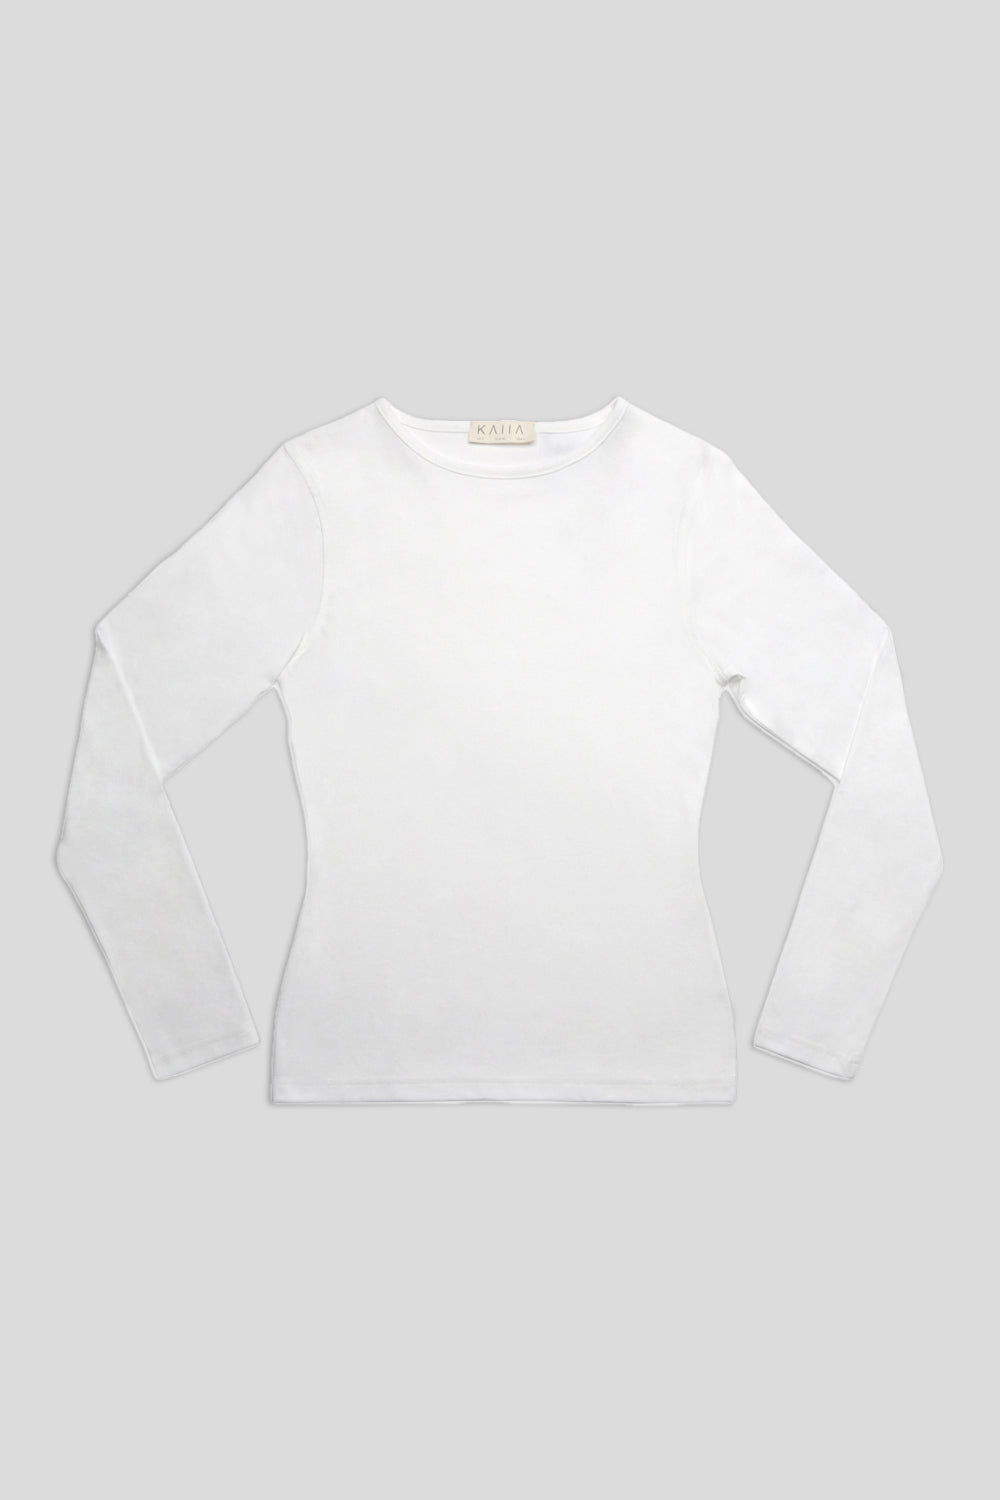 FITTED LONG SLEEVE T-SHIRT WHITE